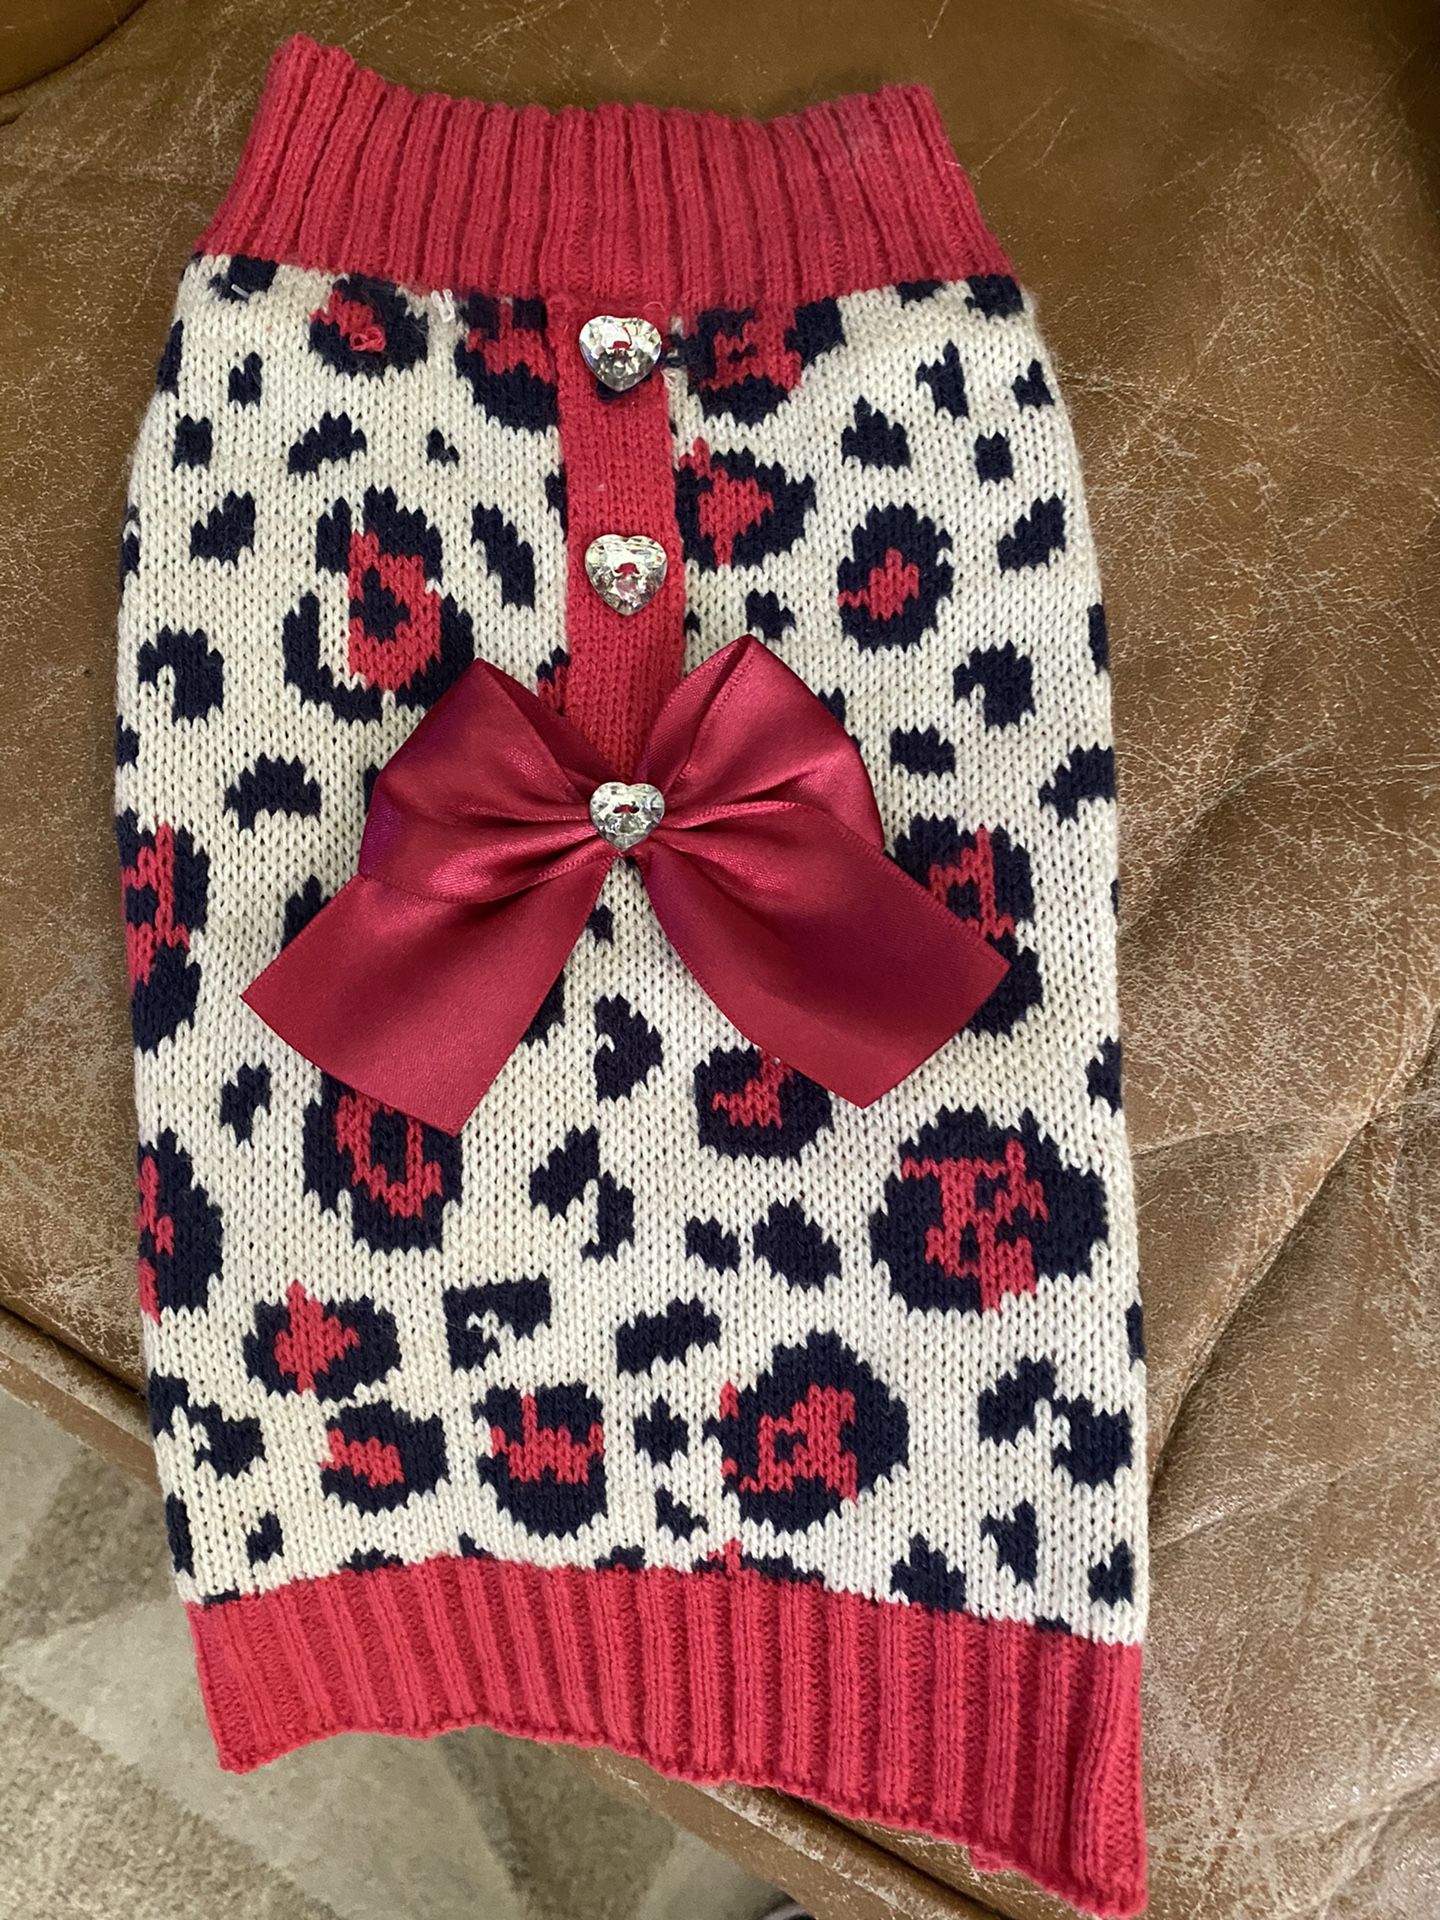 Dog Sweater For A Small Dog $5